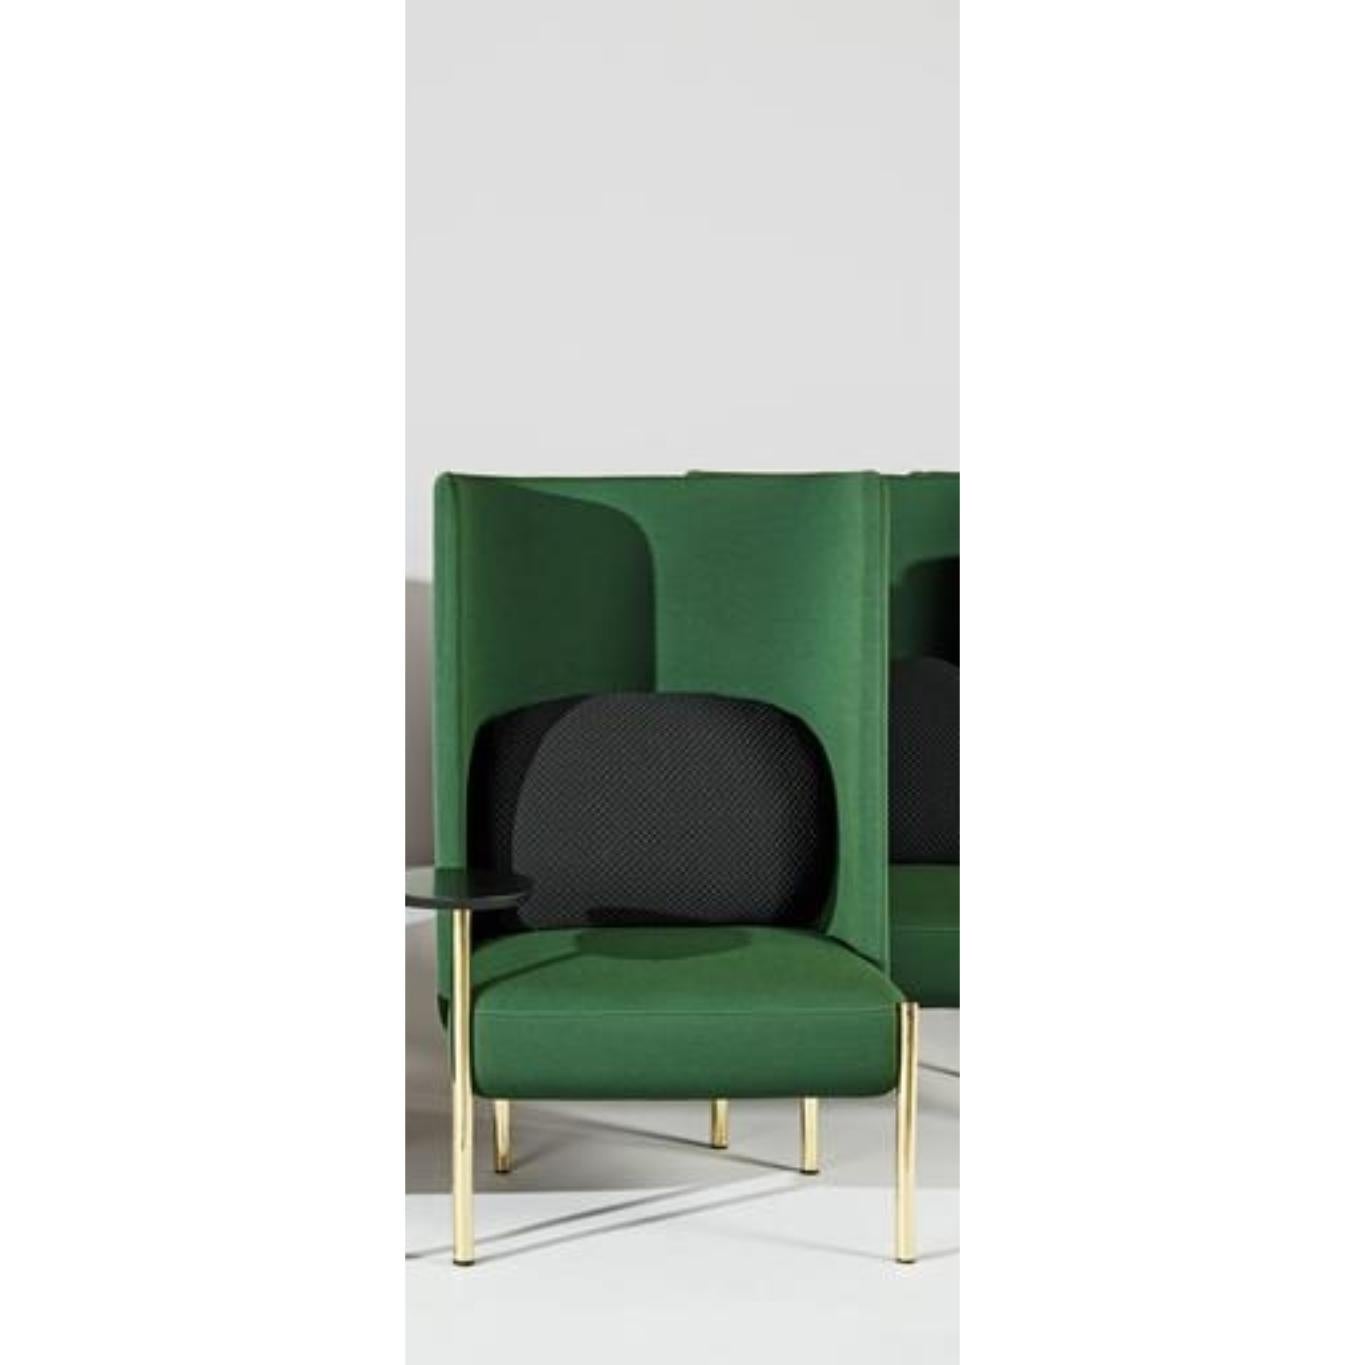 Ara green armchair by Pepe Albargues
Dimensions: 125 x 74 x 74 cm
Materials: Iron backrest structure and pine wood seat structure. Seat stuffed with polyurethane 3542 covered with polyester fibre. Cushion: 50% goose feathers and 50% combed